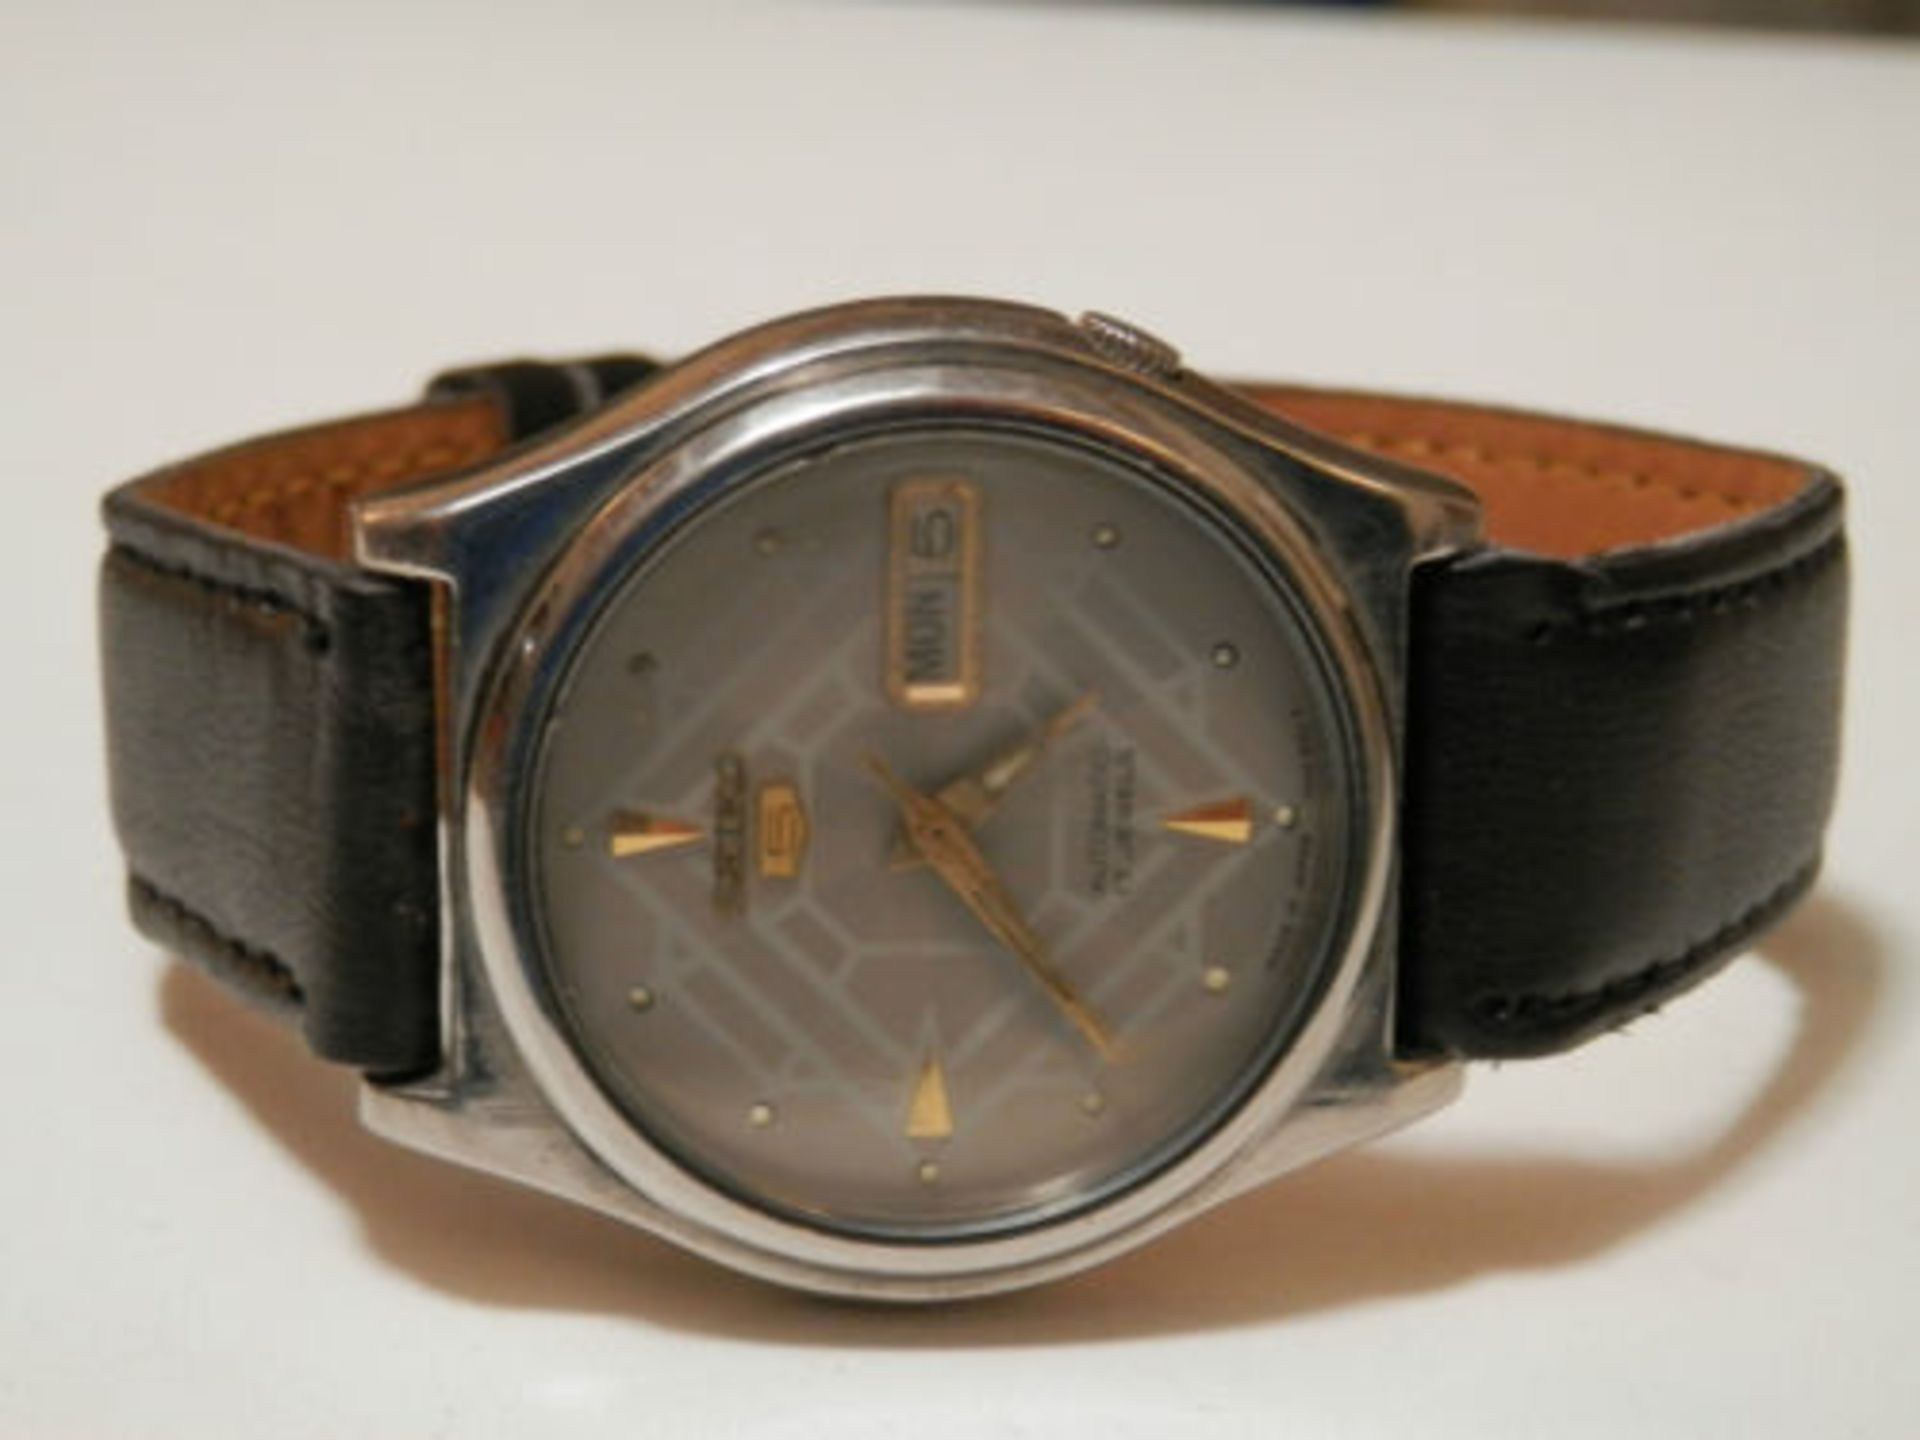 1984 WORKING SEIKO 7009 AUTOMATIC 17 JEWEL DAY/DATE WATCH, STAINLESS CASE. - Image 13 of 13